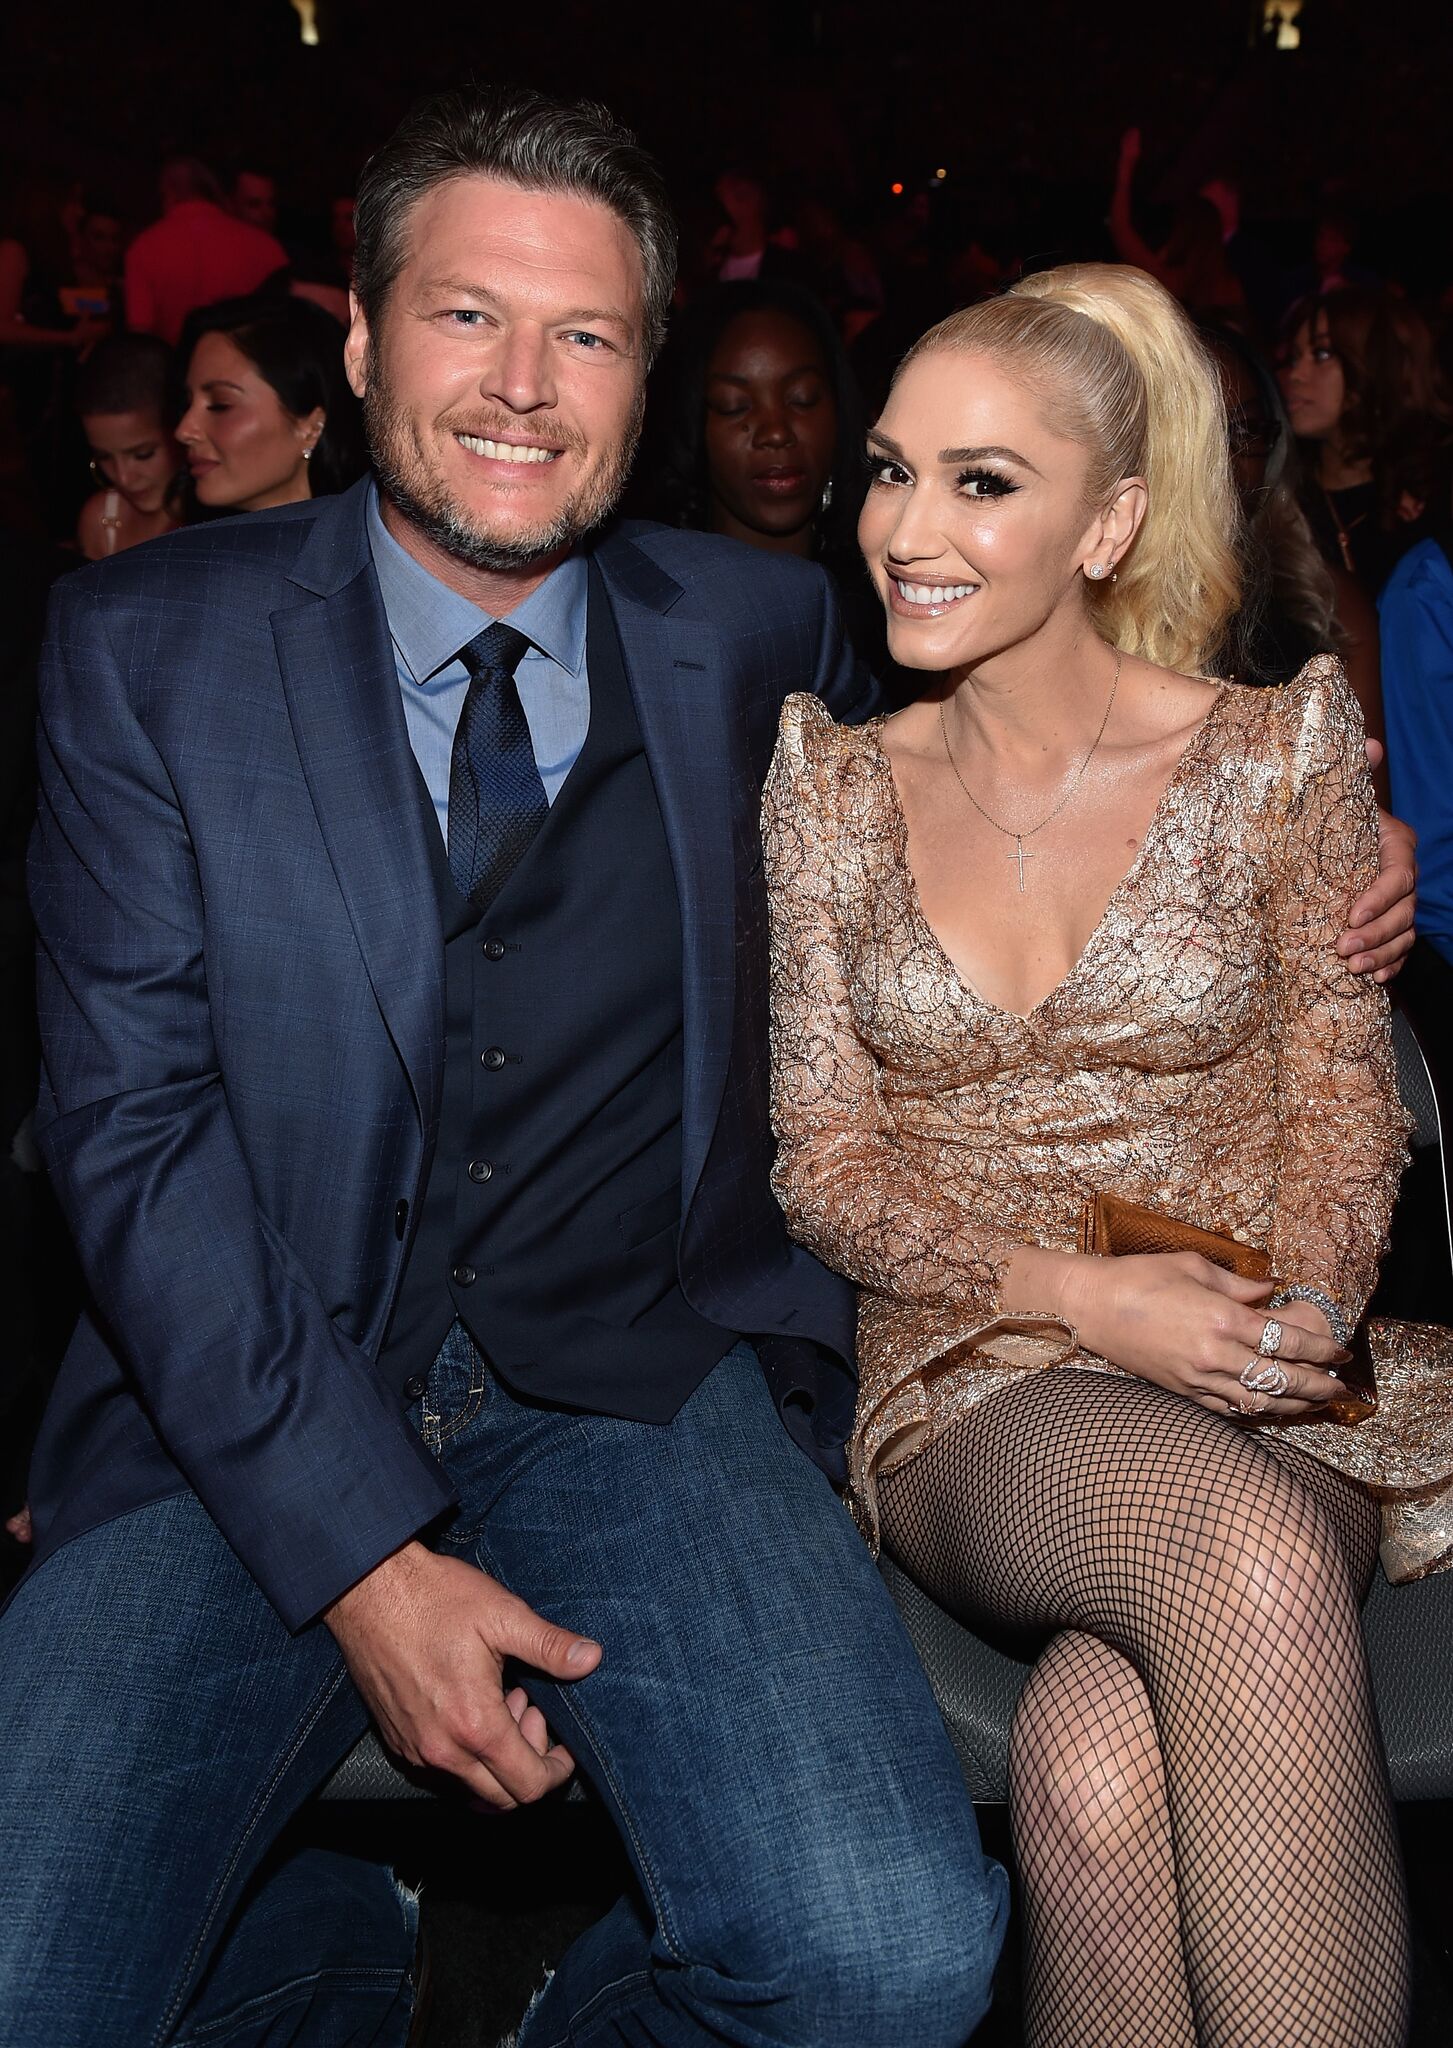 Recording artists Blake Shelton (L) and Gwen Stefani attend the 2017 Billboard Music Awards at T-Mobile Arena | Getty Images